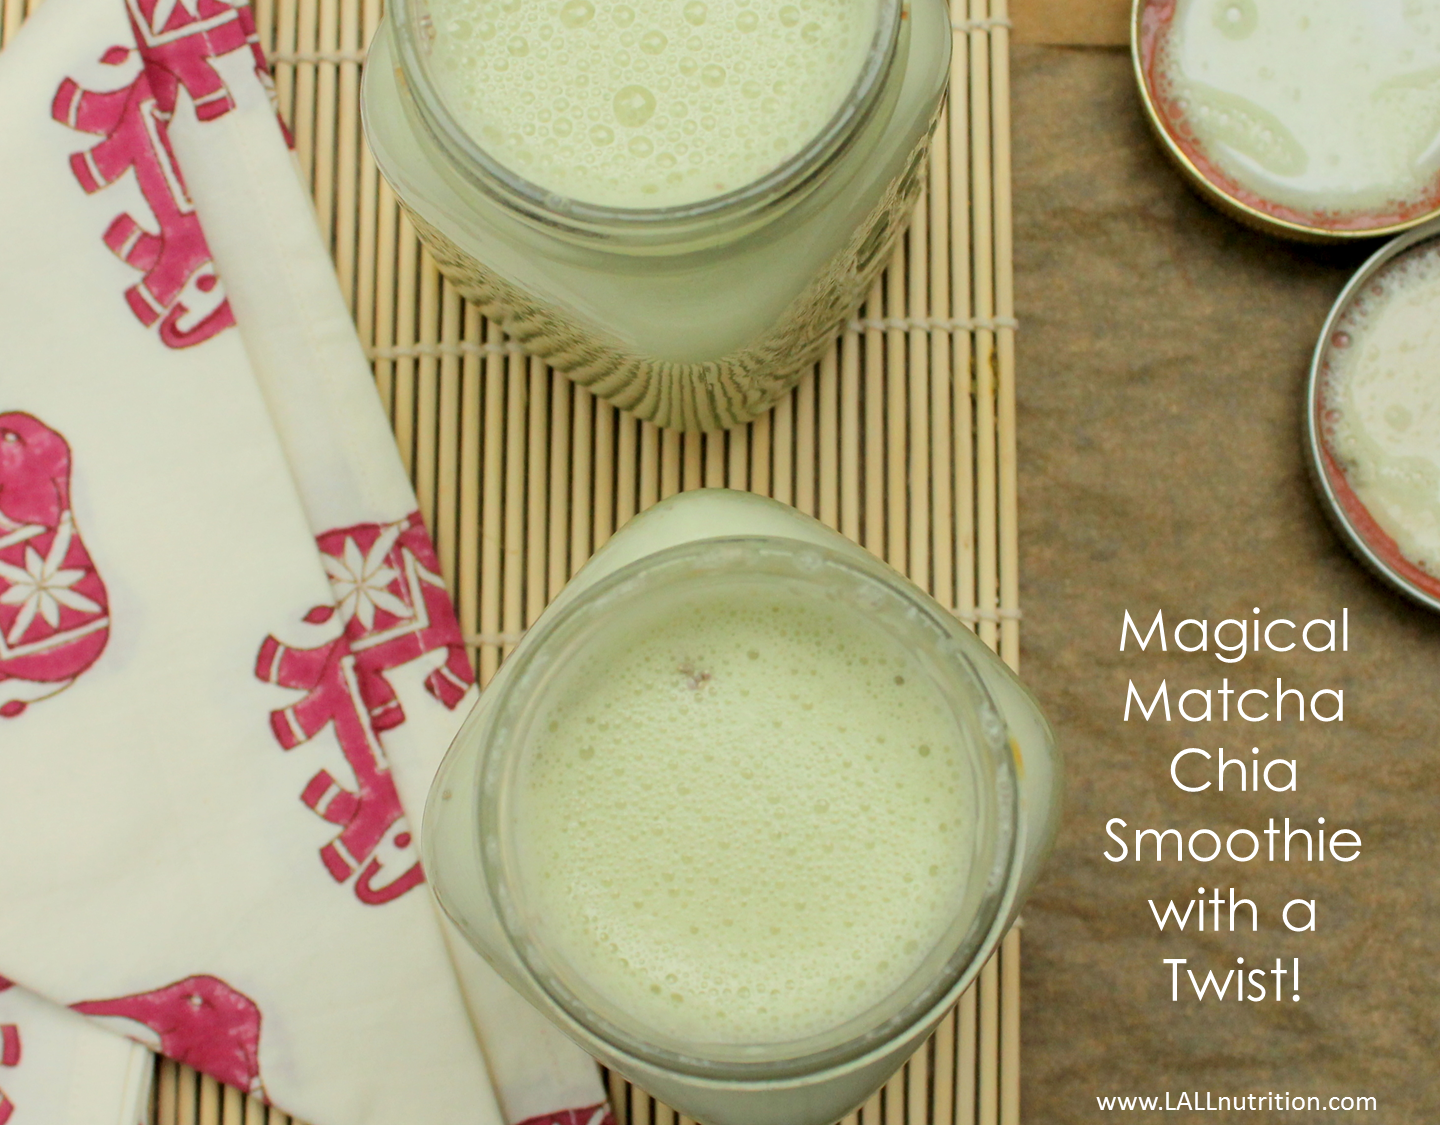 Magical Matcha and Chia Smoothie with a Twist!